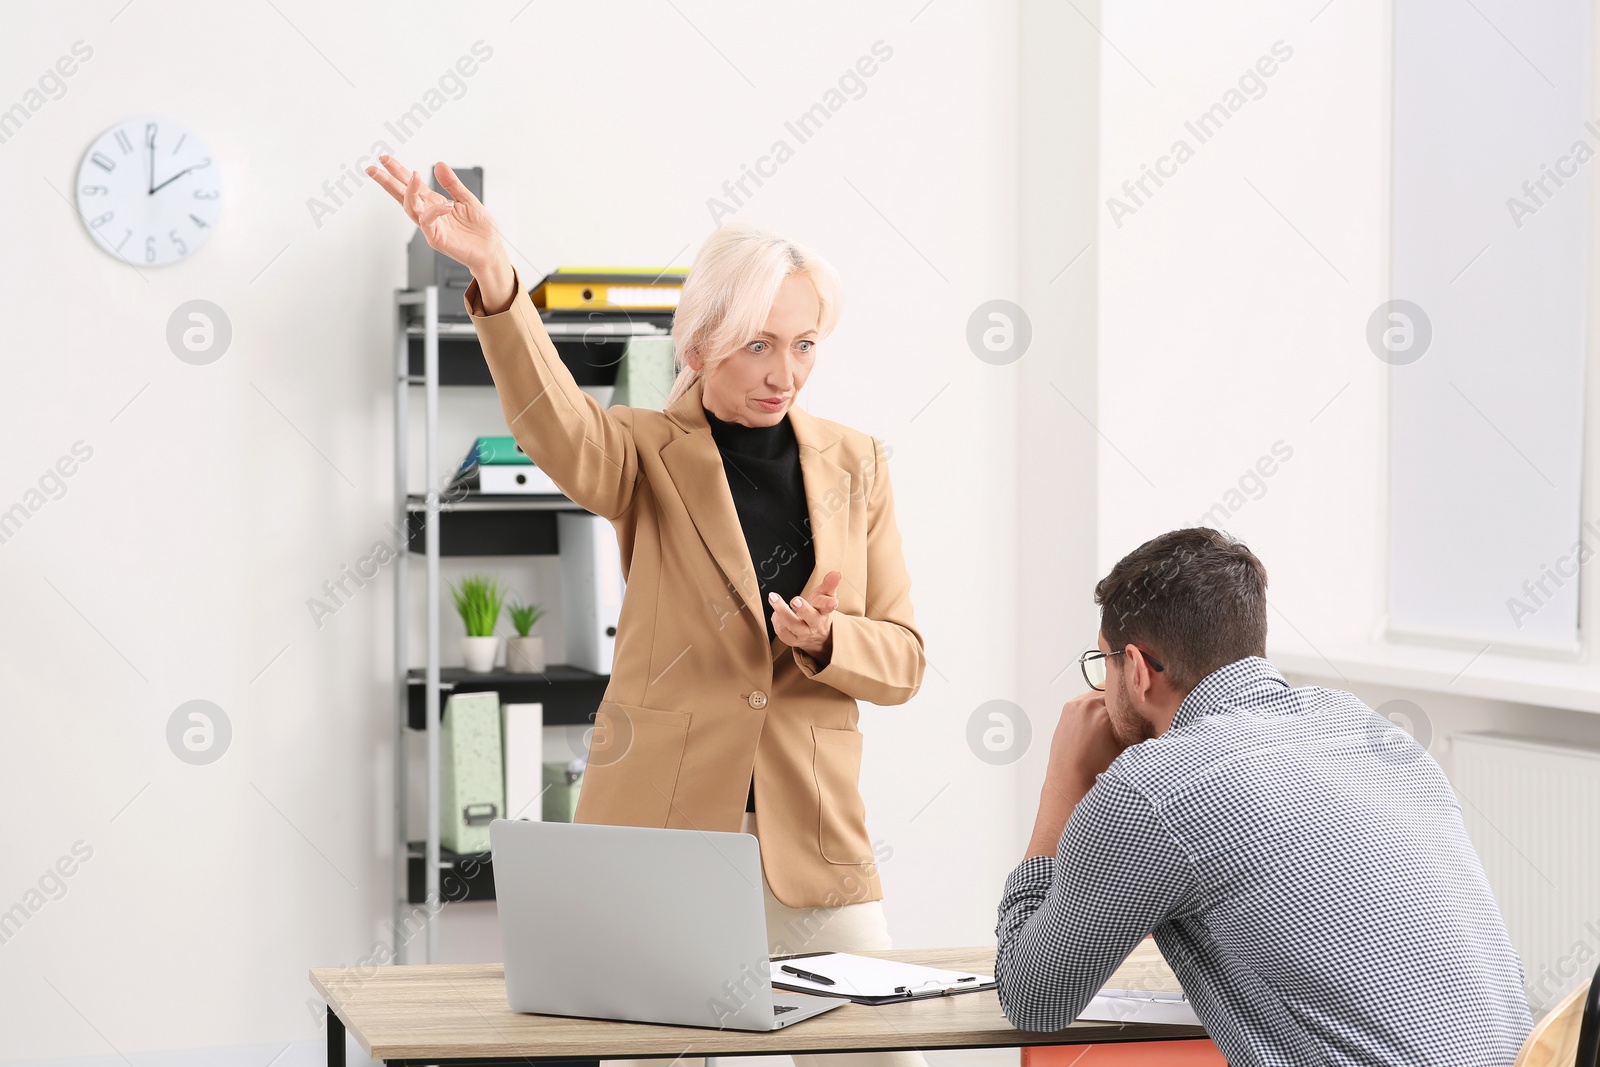 Photo of Emotional boss and stressed employee discussing work issues at wooden table in office